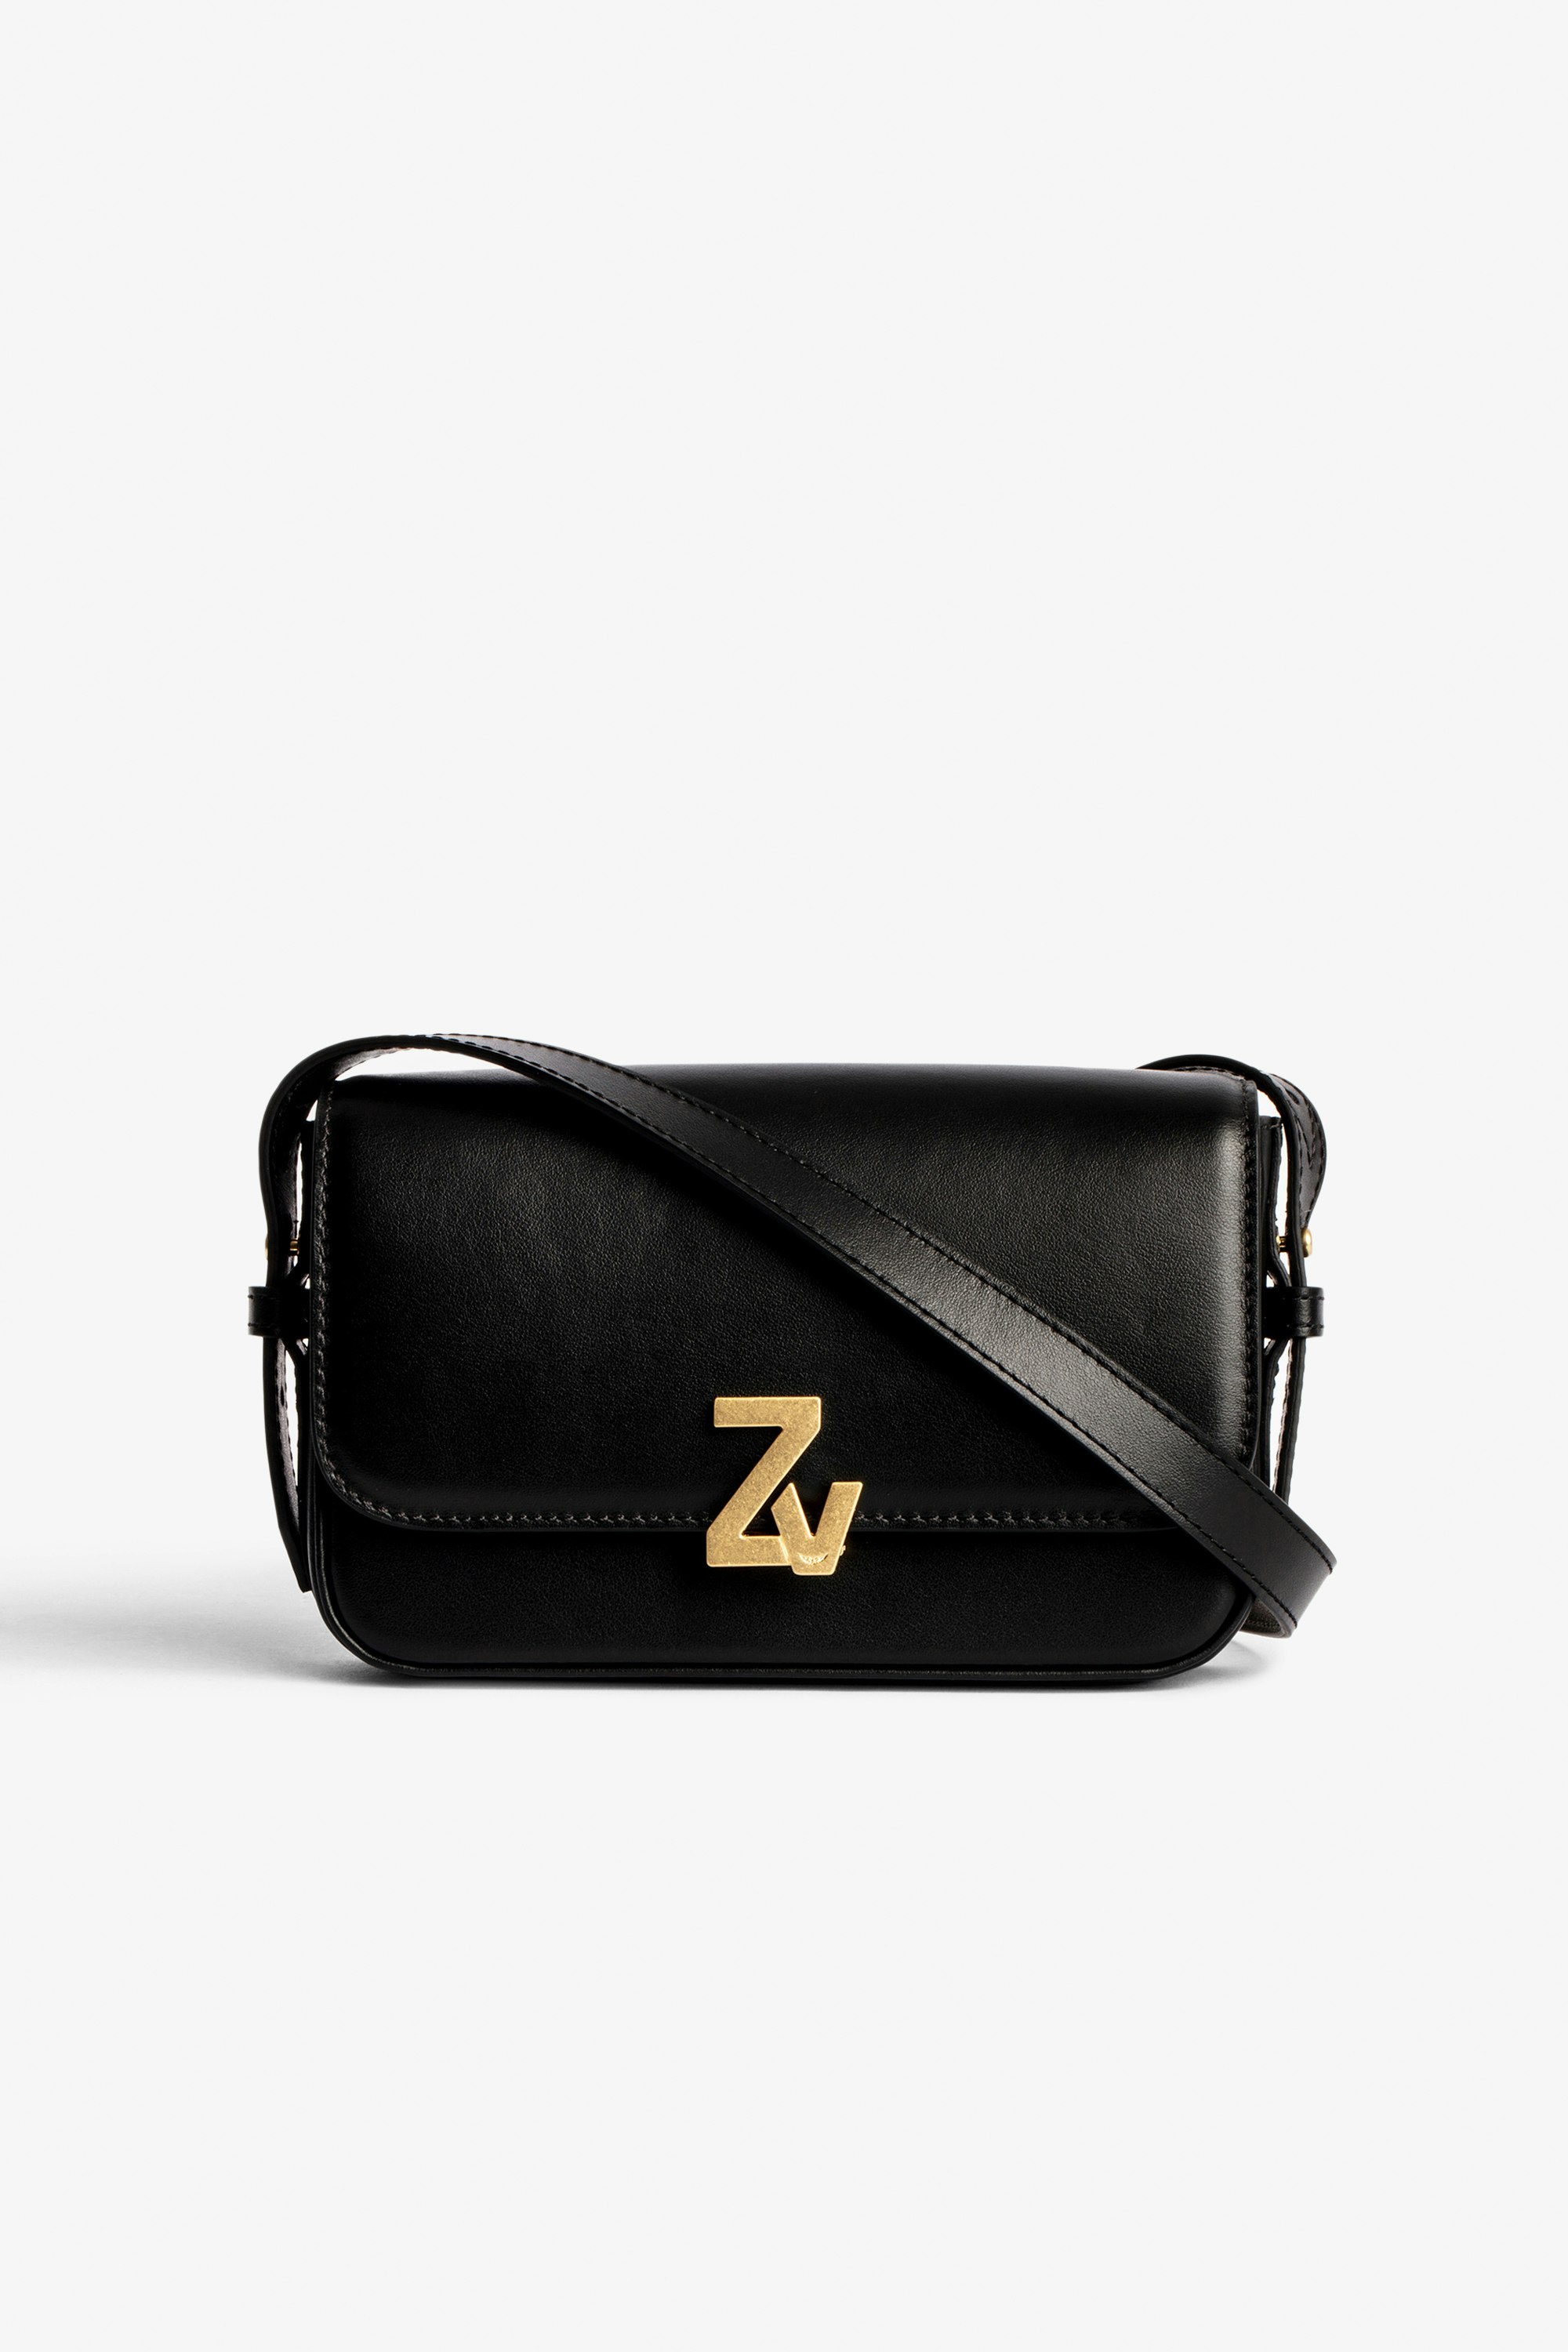 Le Mini ZV Initiale Bag undefined